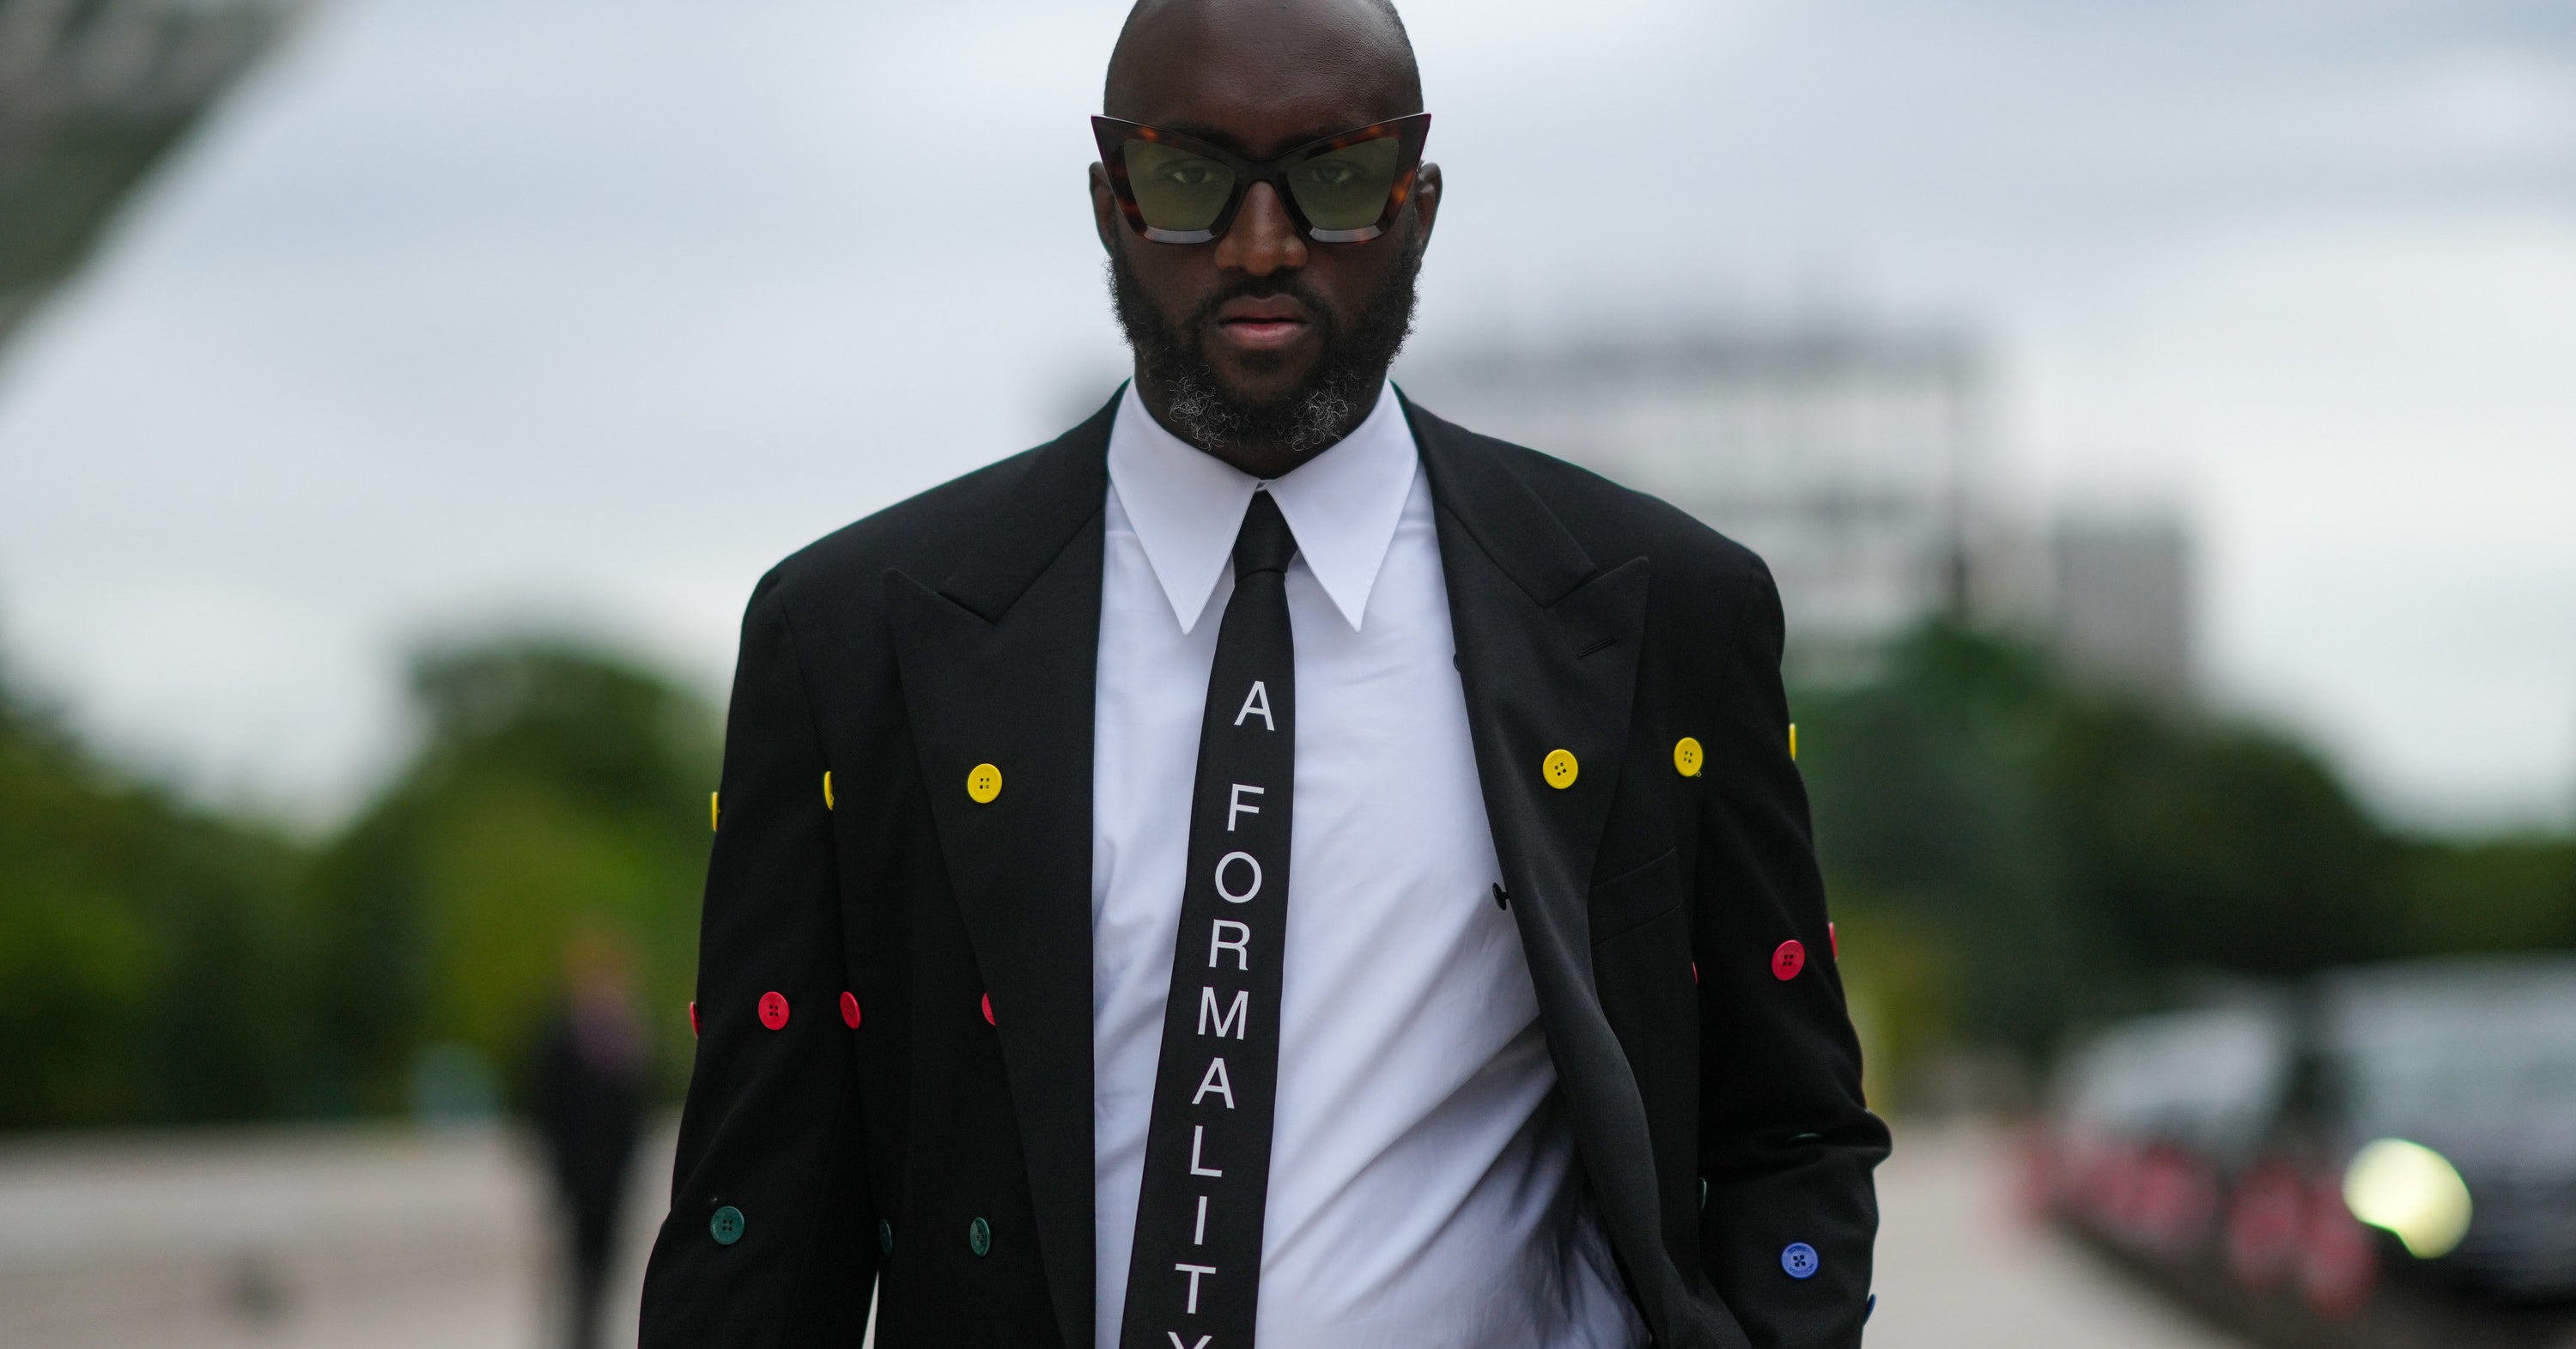 Virgil Abloh, The First Black Man To Be An Artistic Director At Louis Vuitton, Dies At 41